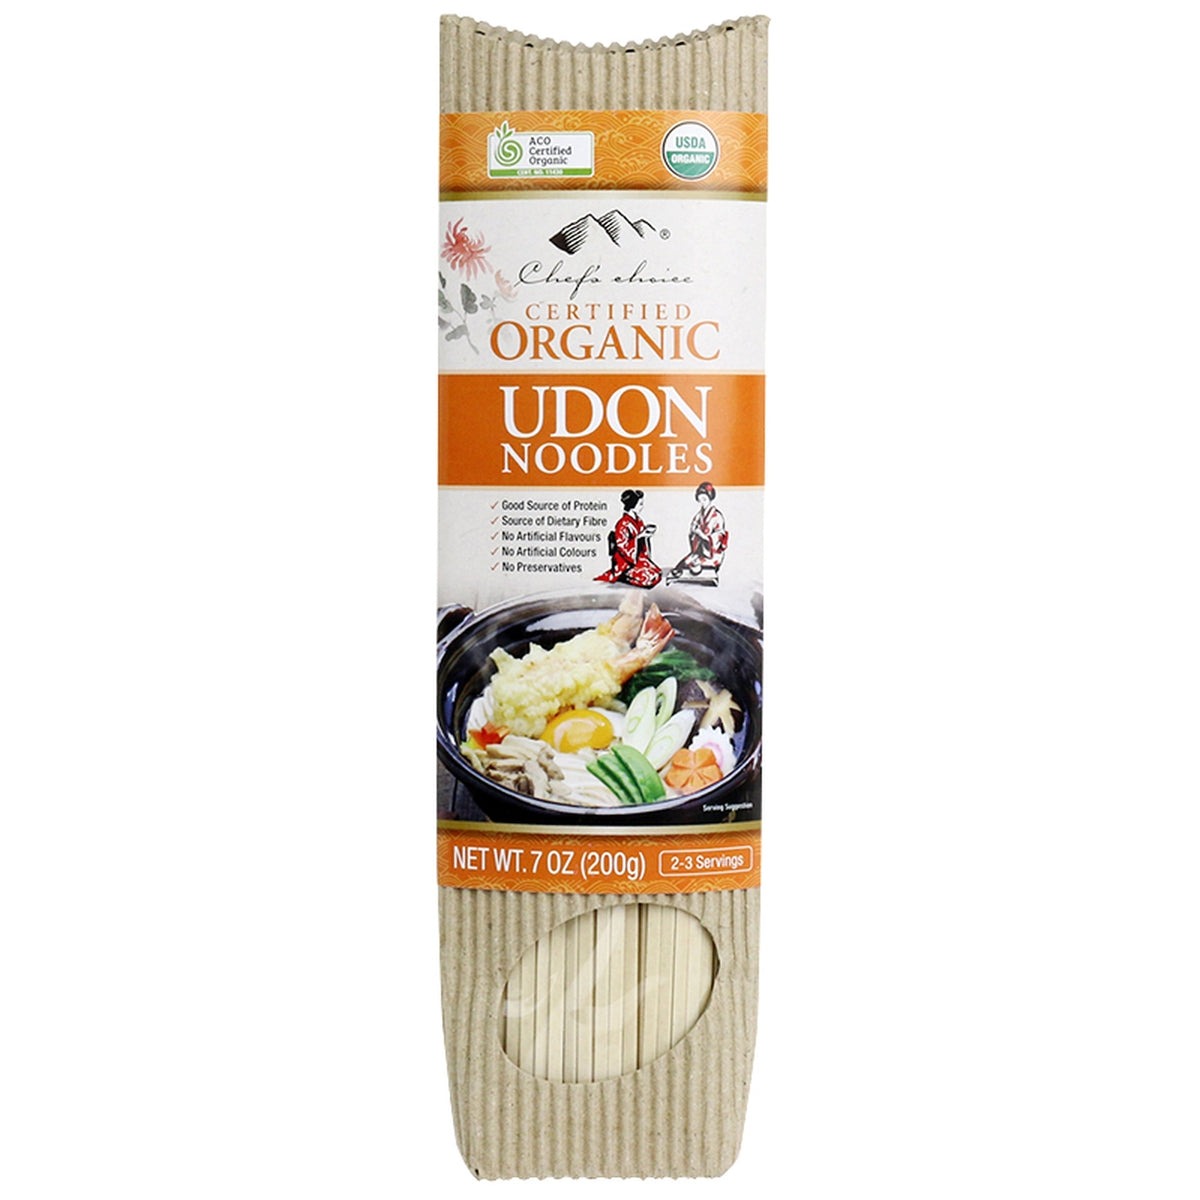 Chefs Choice Brown Rice Udon